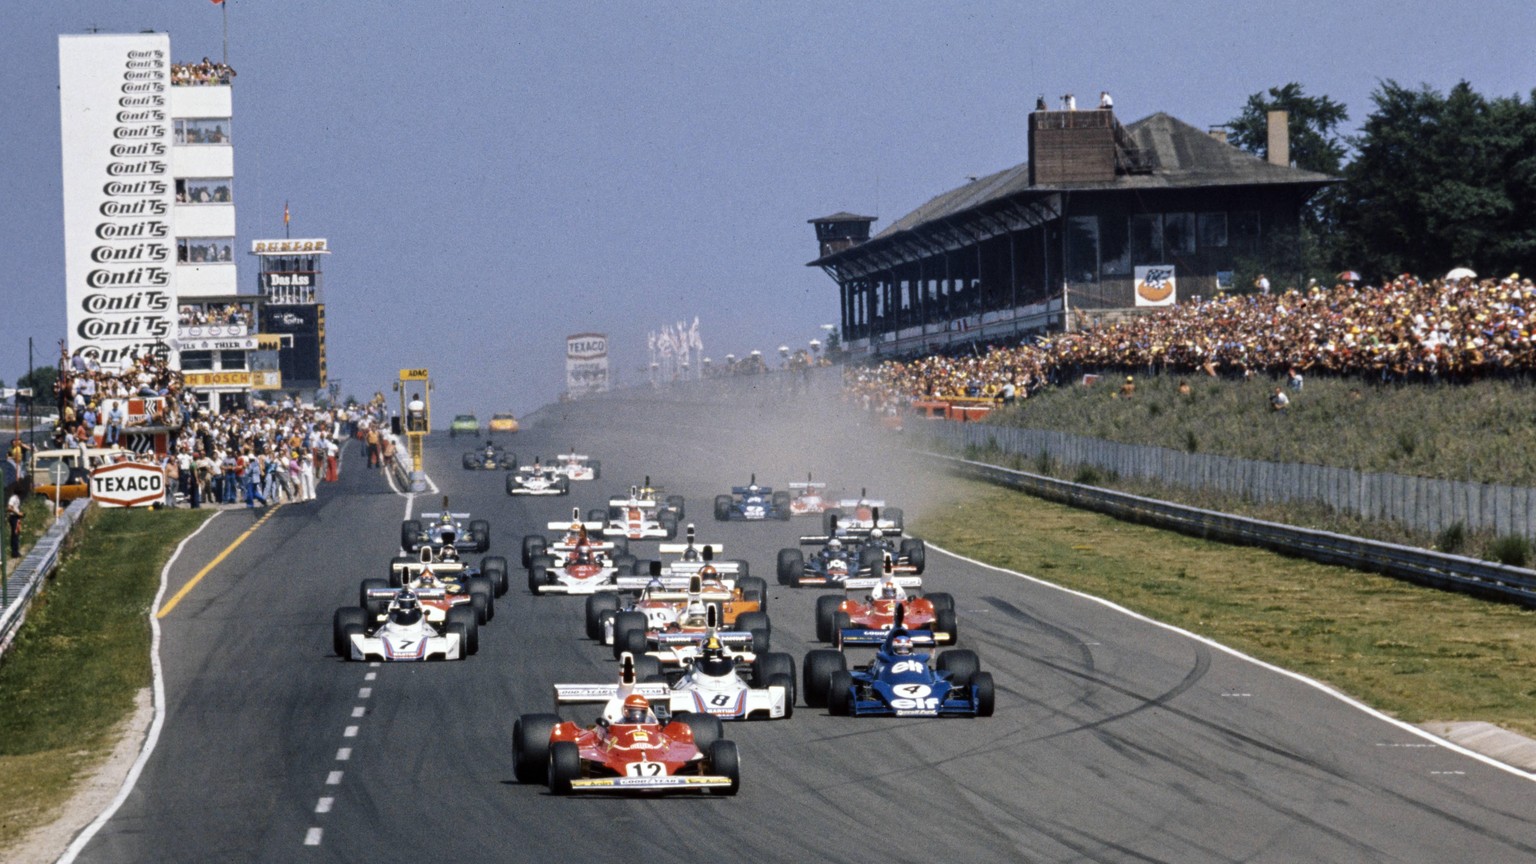 IMAGO / Motorsport Images

1975 German GP NüRBURGRING, GERMANY - AUGUST 03: Niki Lauda, Ferrari 312T leads Carlos Pace, Brabham BT44B Ford and Patrick Depailler, Tyrrell 007 Ford at the start during t ...